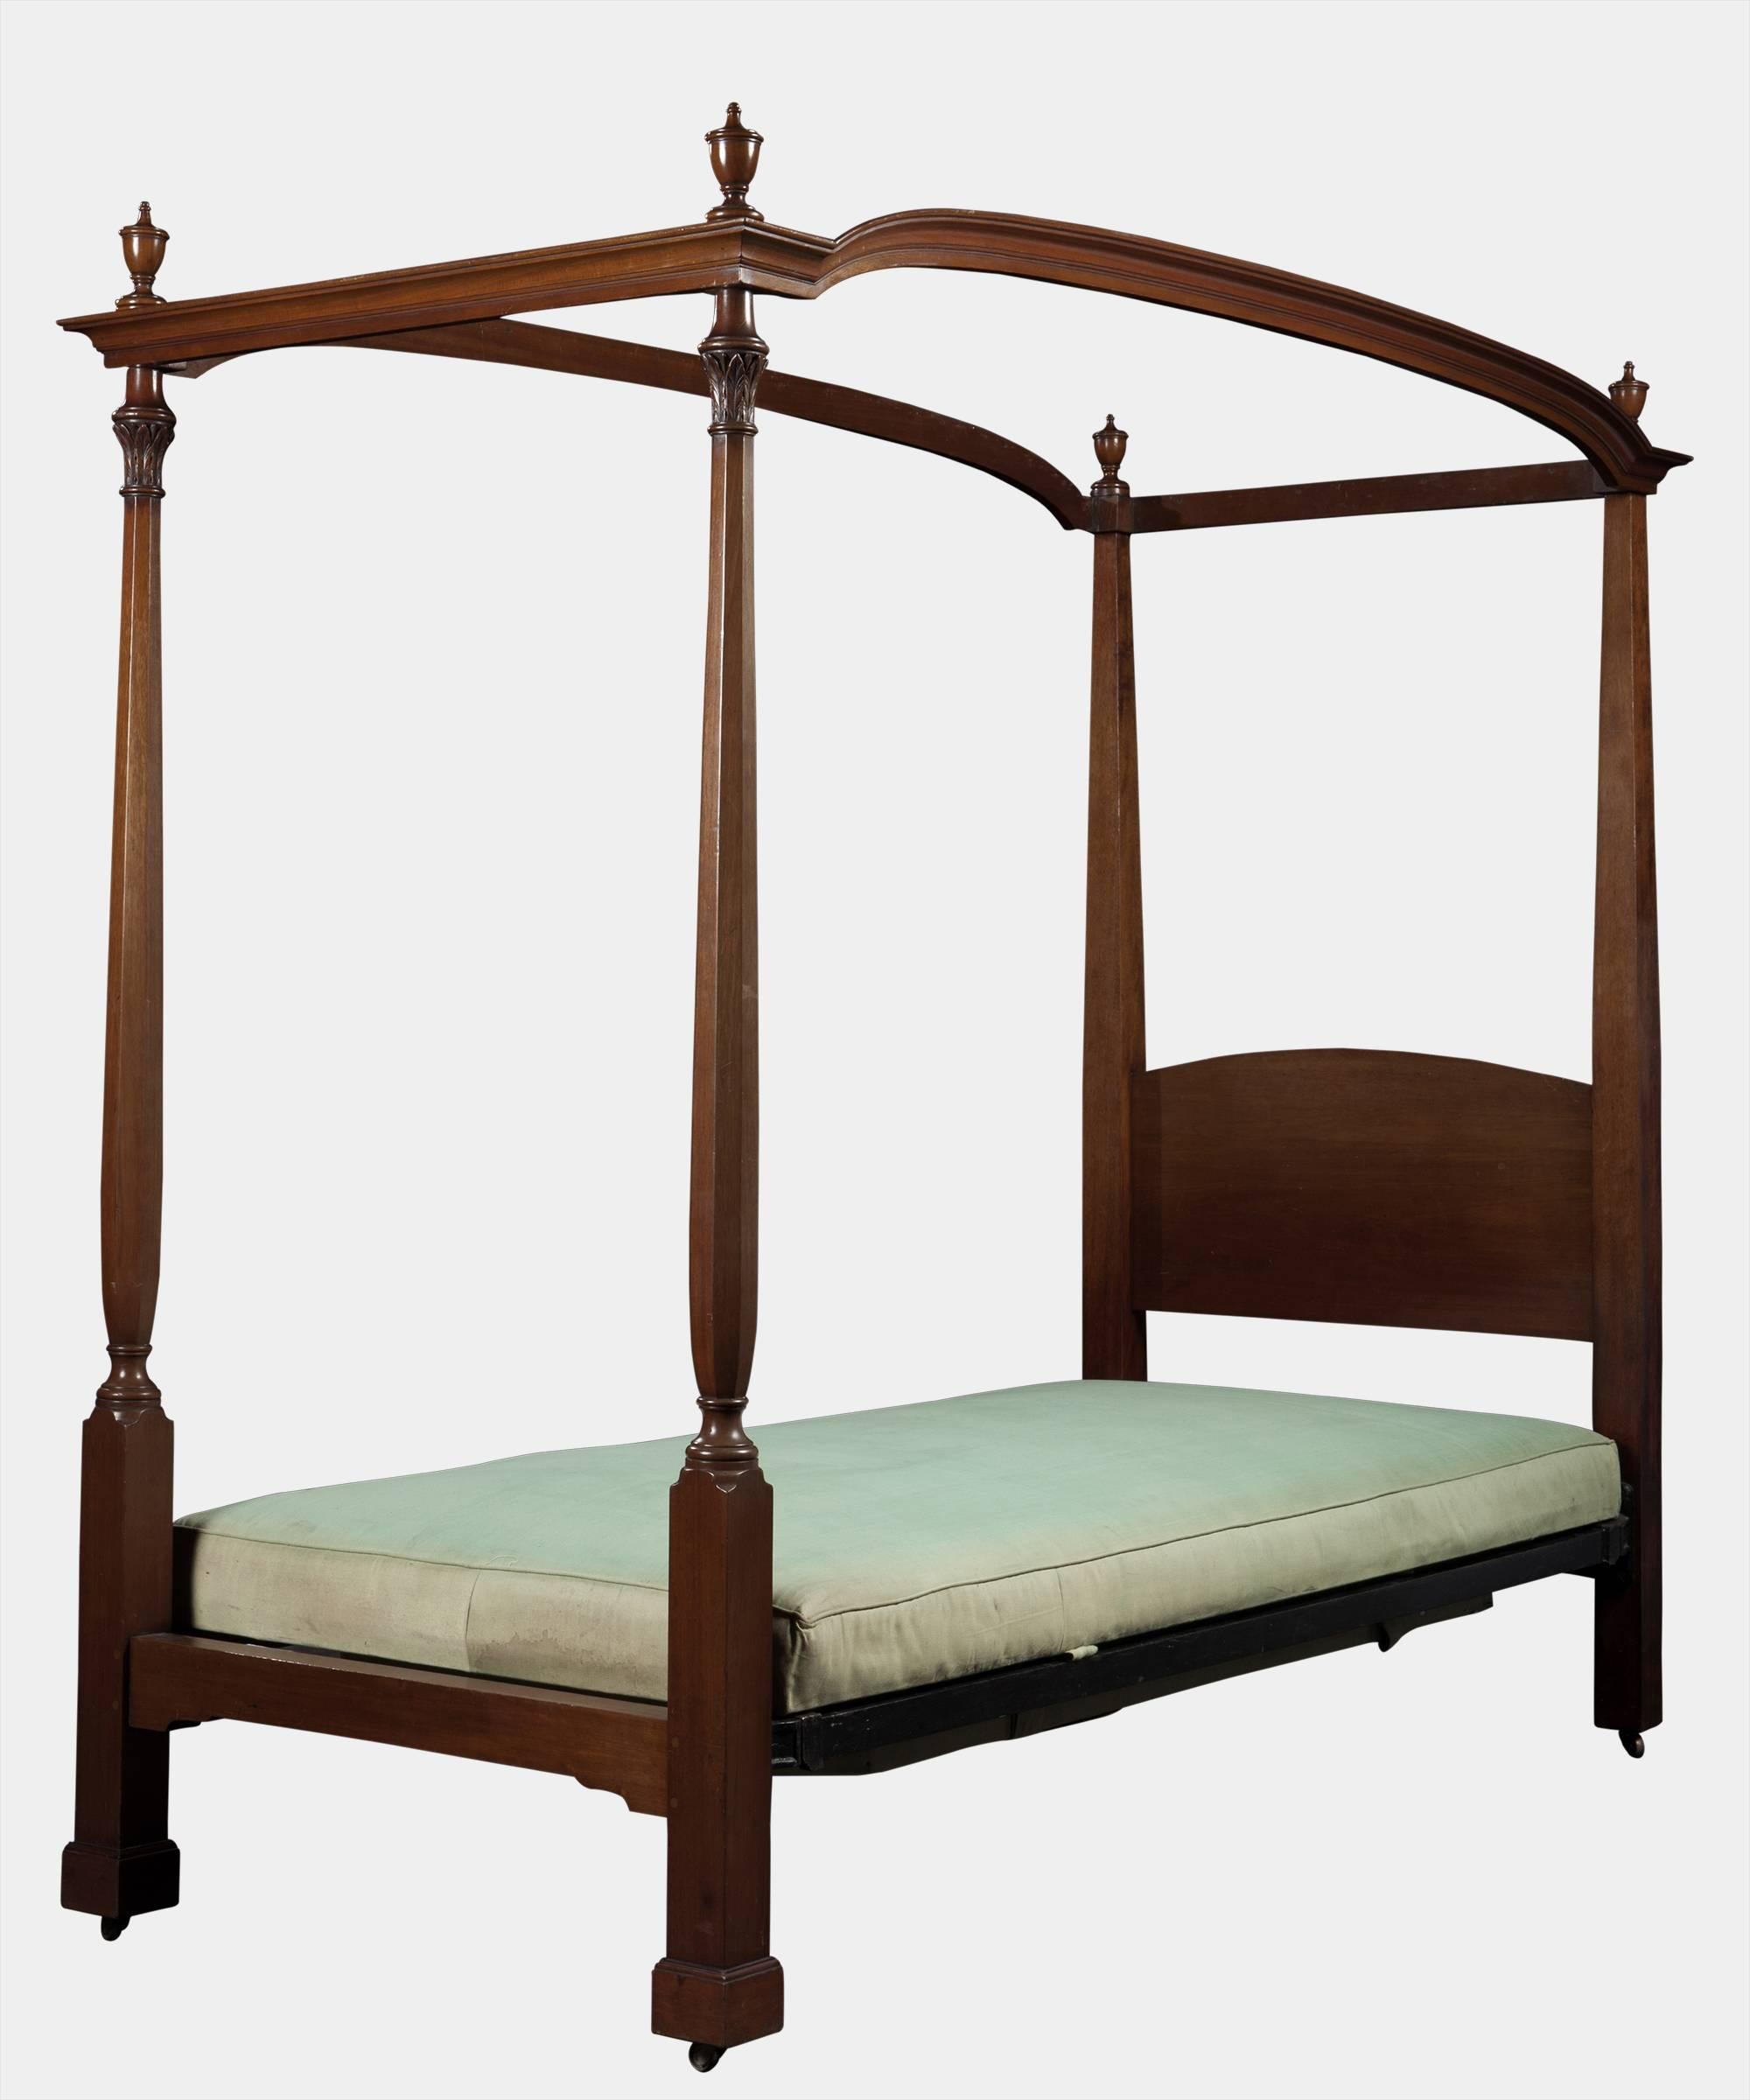 Original divan base, with turned column bed ends. Made by Heals of London.